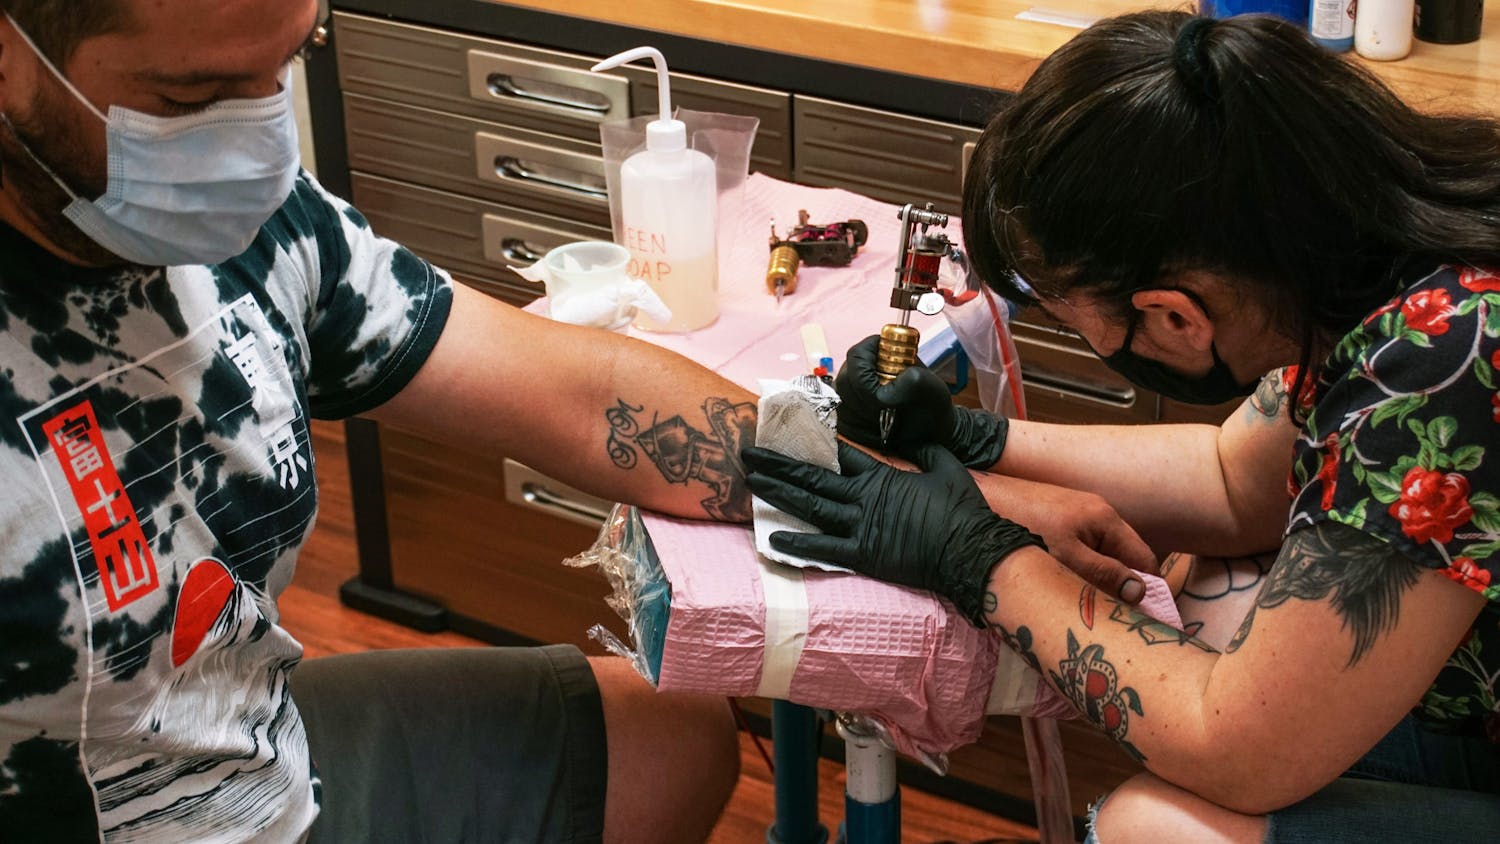 Kristyn Lopez, 37, (right) gives a tattoo designed to emulate a tarot card to Franciso Martinez, 31, a Gainesville resident (left) on Sunday, June 13, 2021.